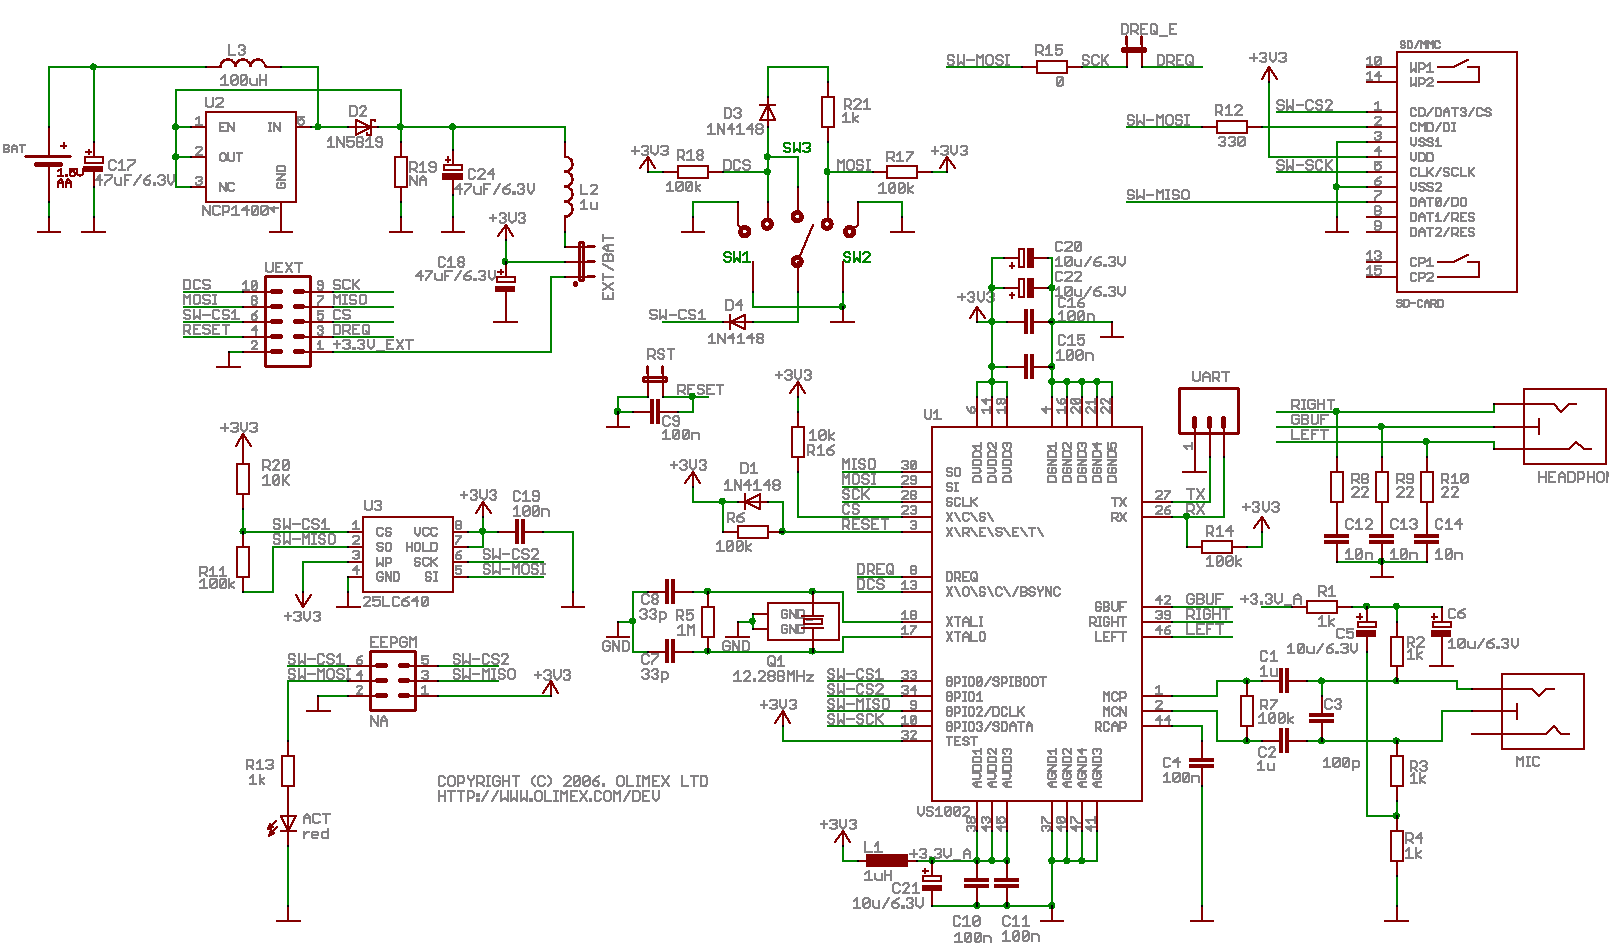 ../_images/MOD-MP3-schematic.png